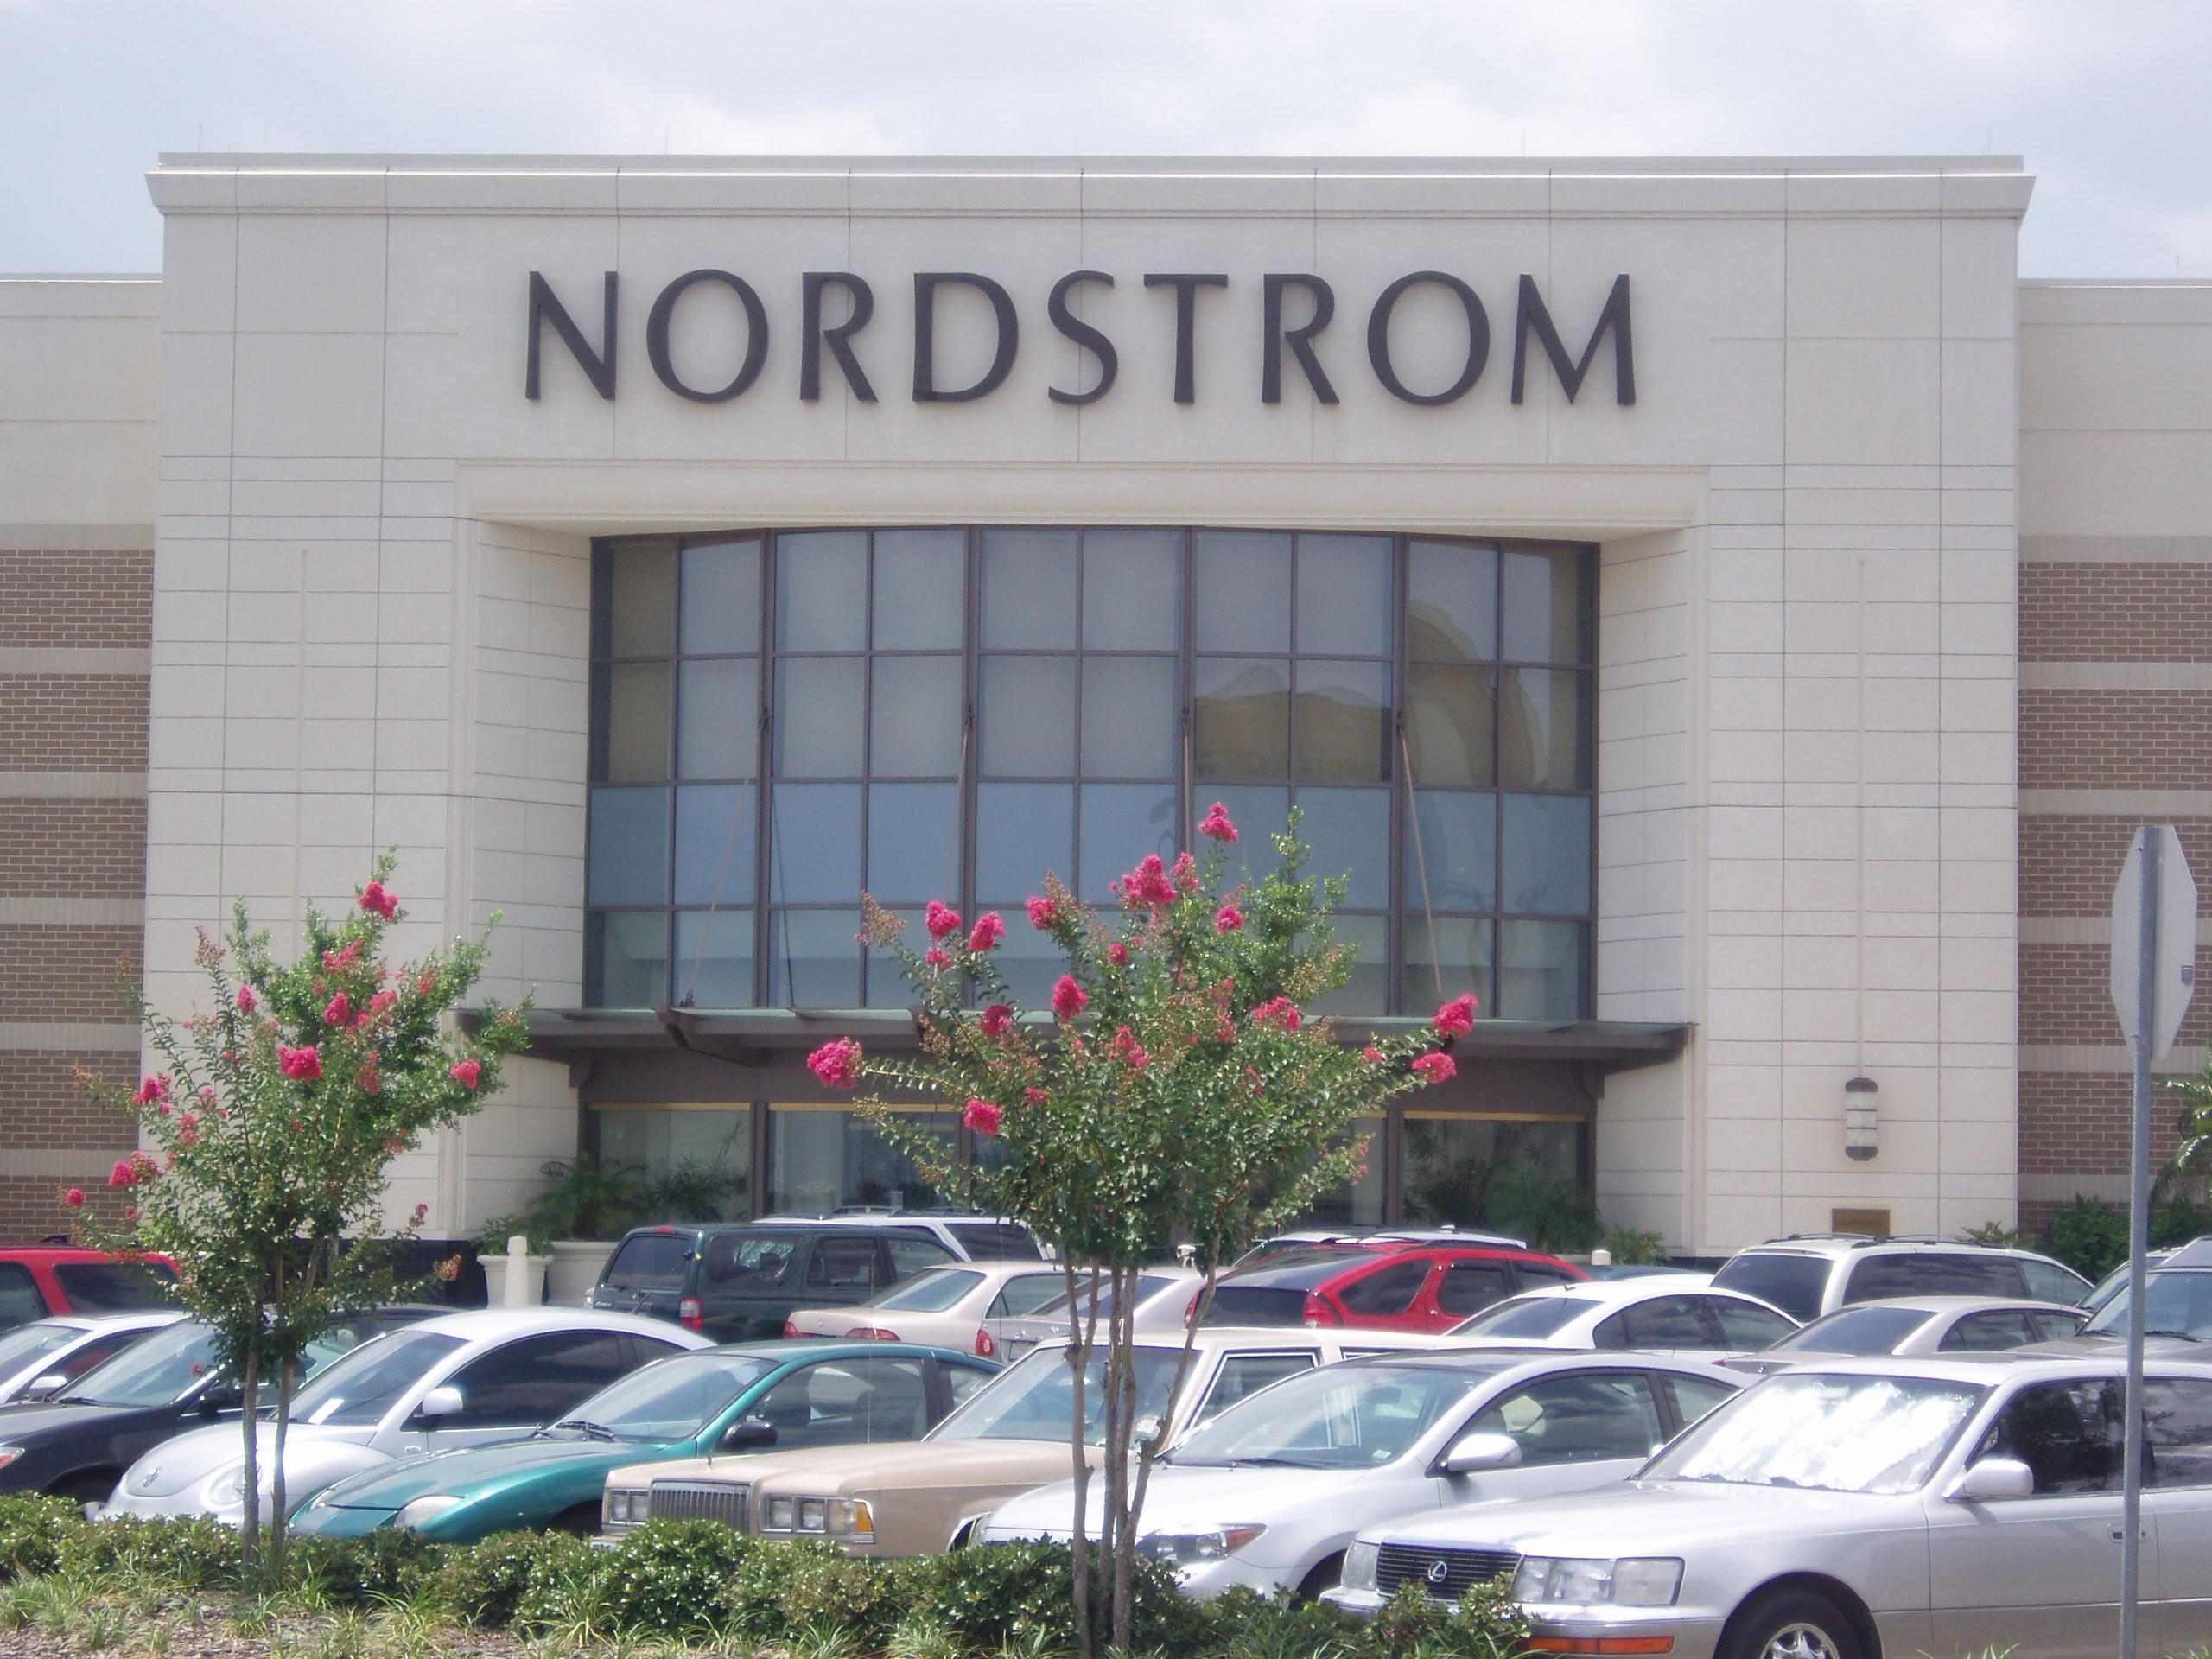 A Nordstrom store